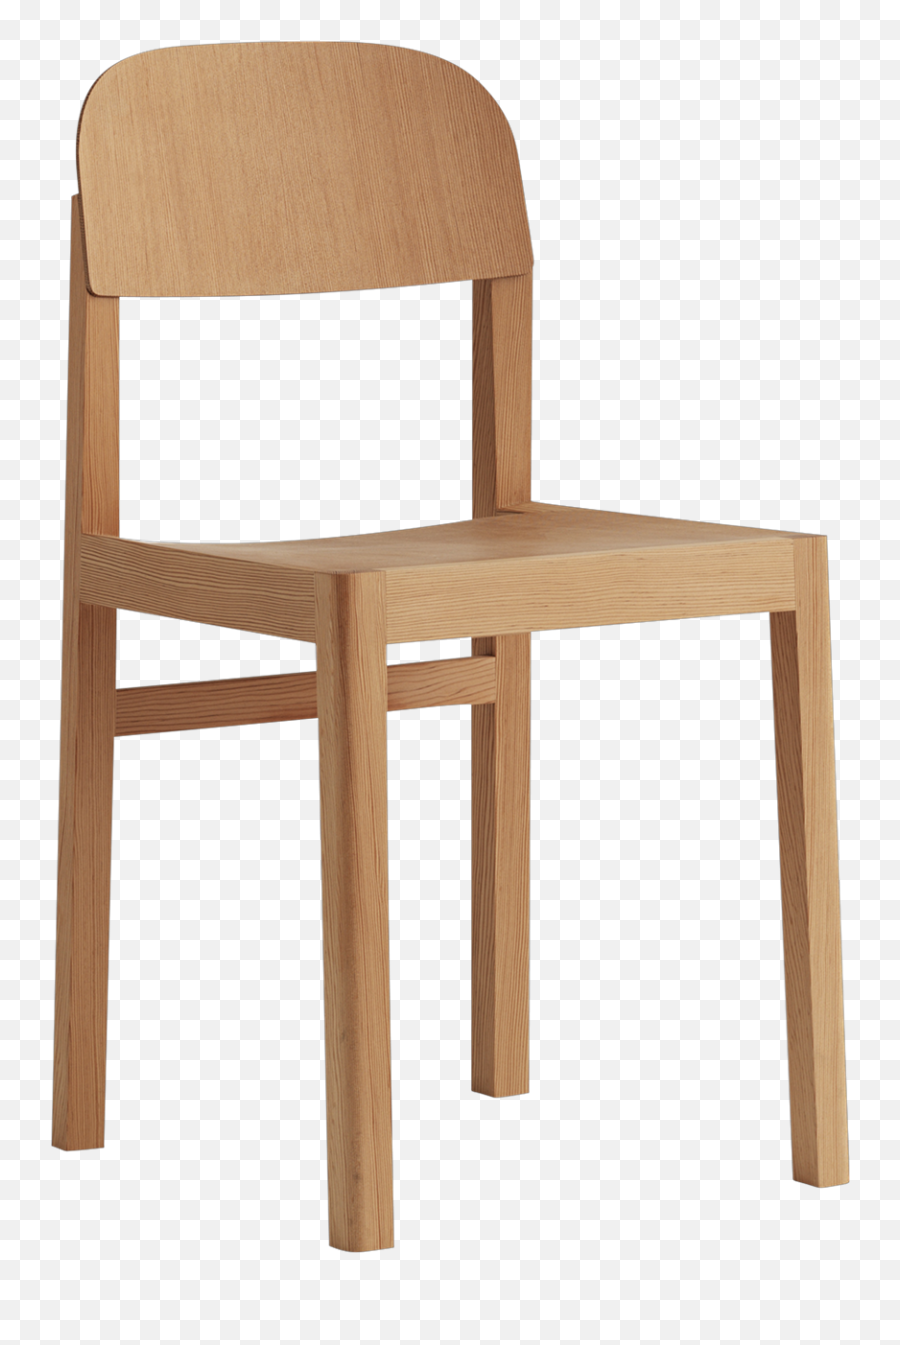 Workshop Chair Png Image For Free Download - Muuto Workshop Chair,Chair Png